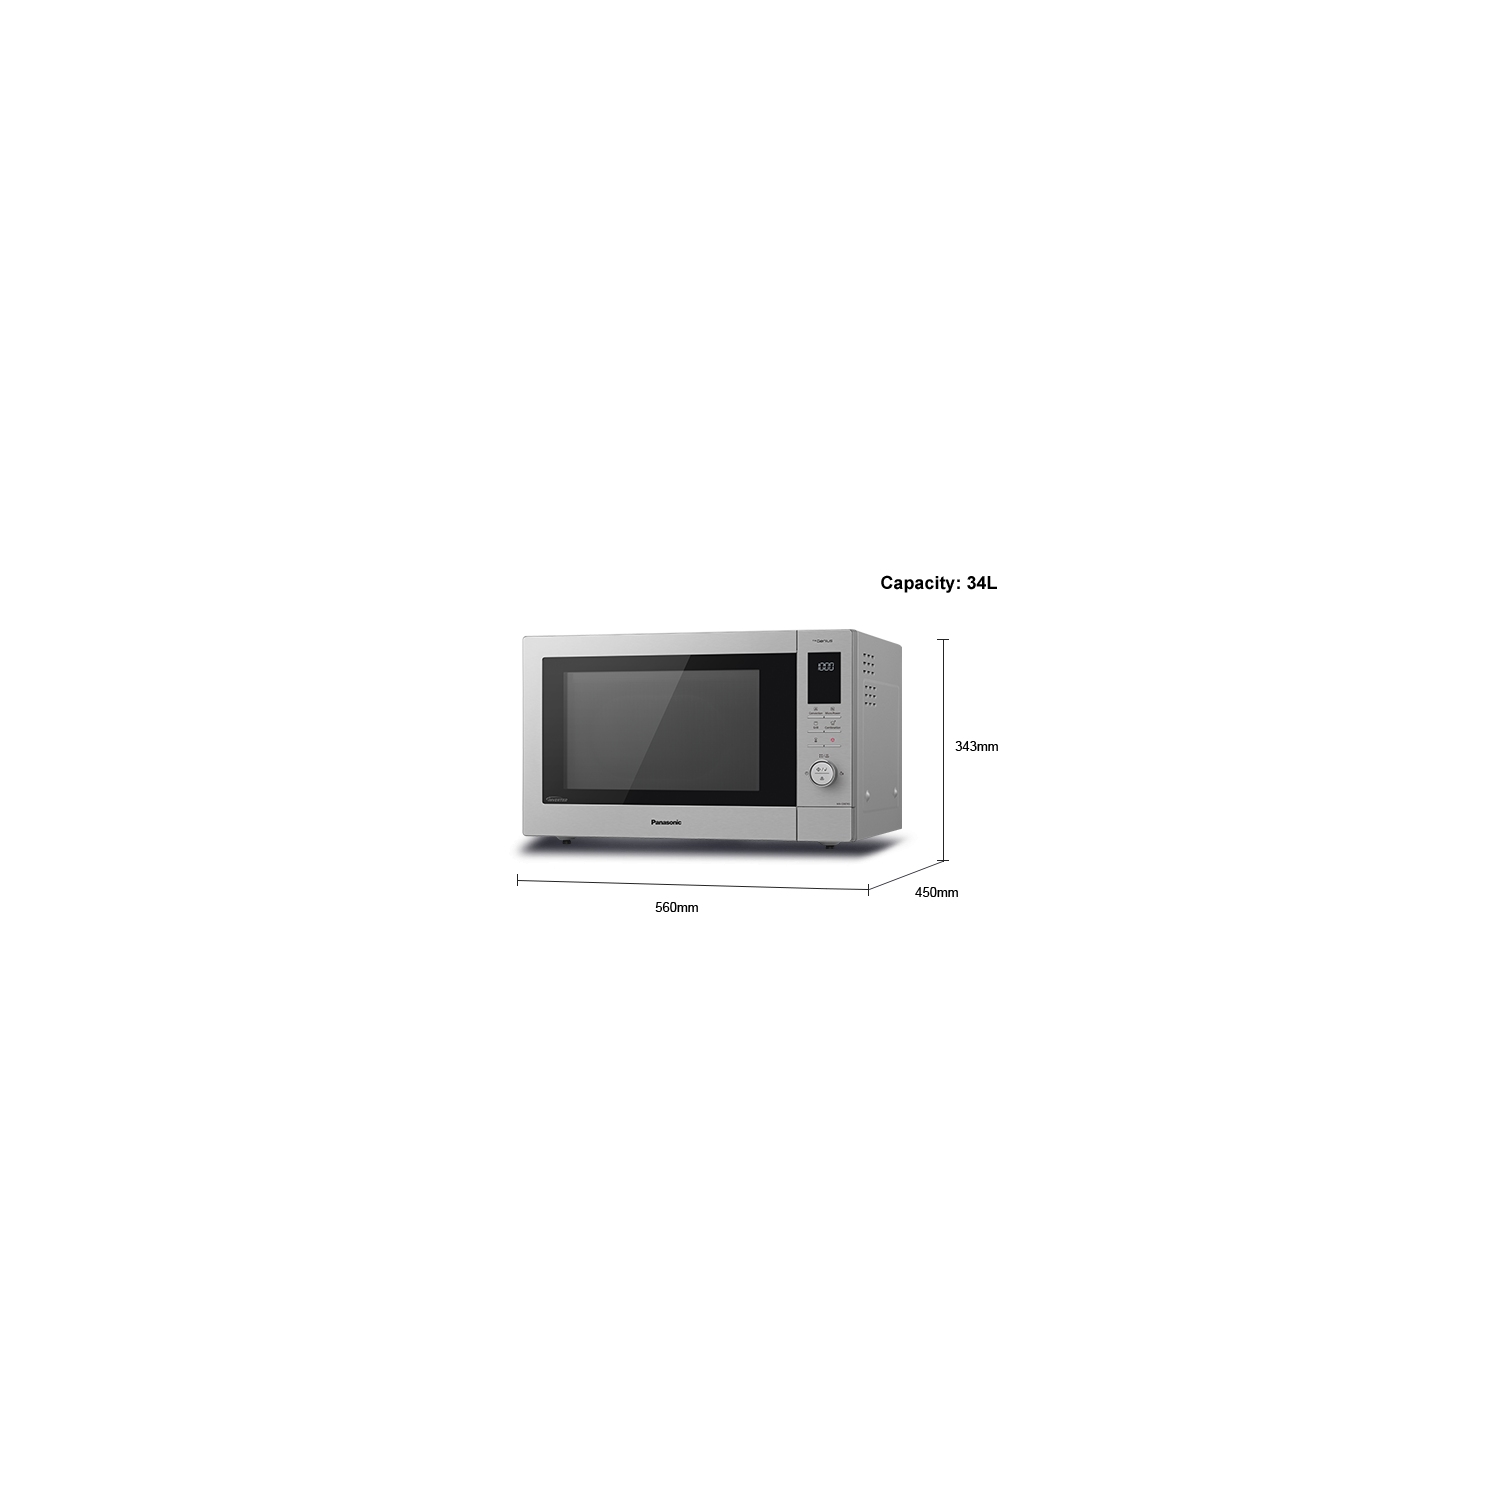 Panasonic 34L 1000w Combination Microwave Oven with Inverter Technology and 1300w Grill - 2